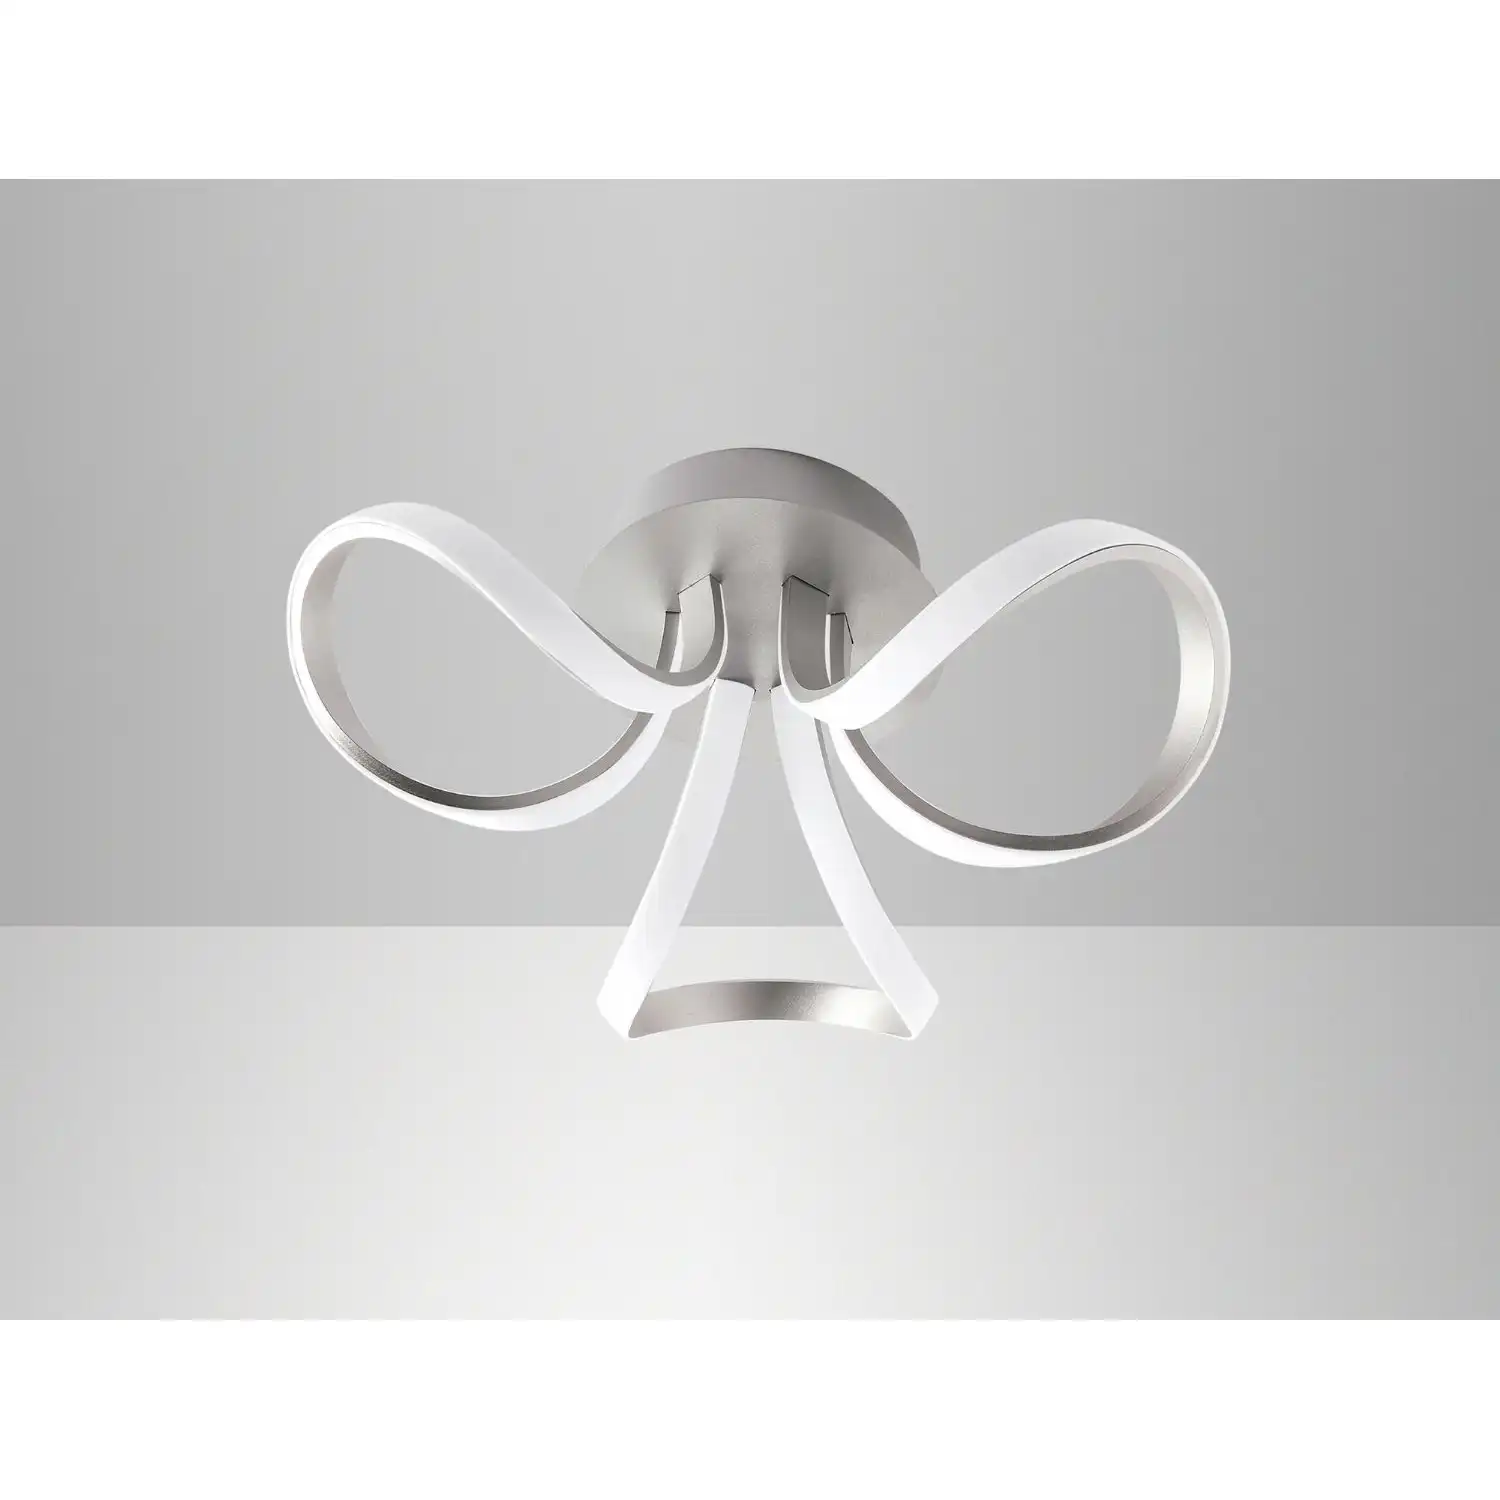 Knot Dimmable Ceiling 48cm Round 36W LED 3 Looped Arms 3000K, Silver Frosted Acrylic